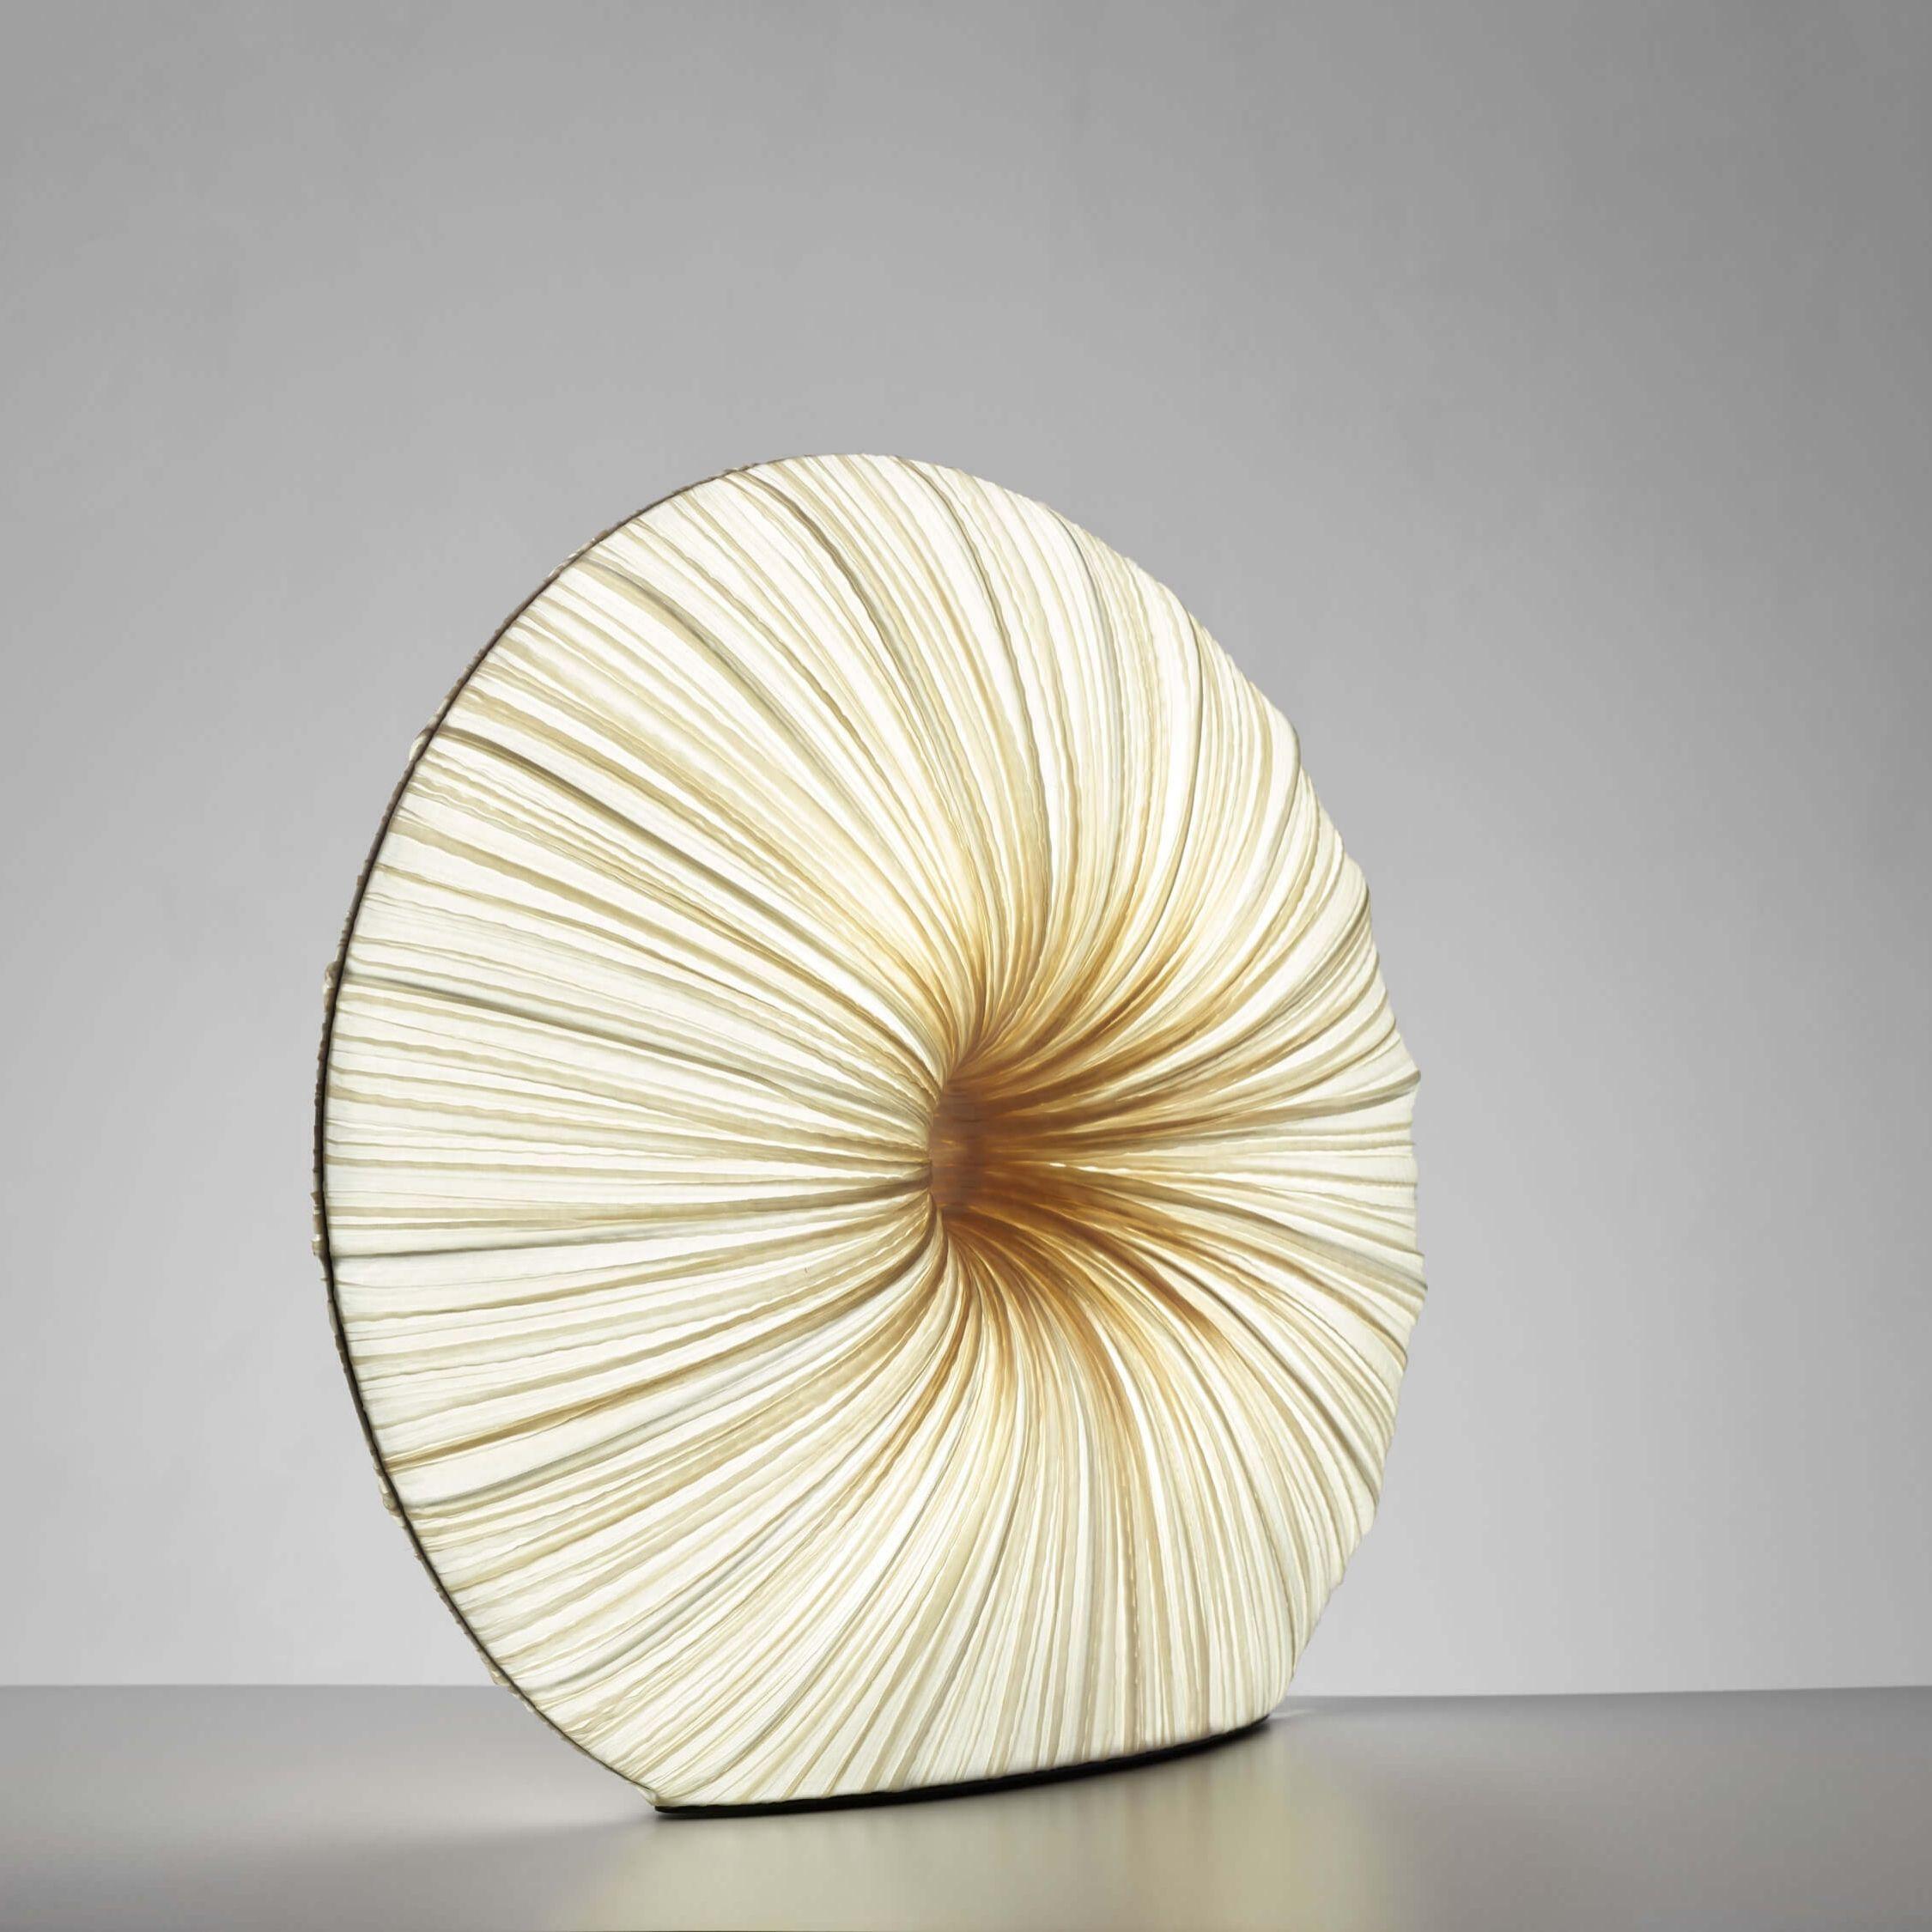 Rigua is part of the Orchestra Family, which strikes a chord with its organic, sculptural forms. Taking inspiration from natural musical forms as well as modern sculpture and architecture, Rigua is a table lamp handmade from crushed silk on